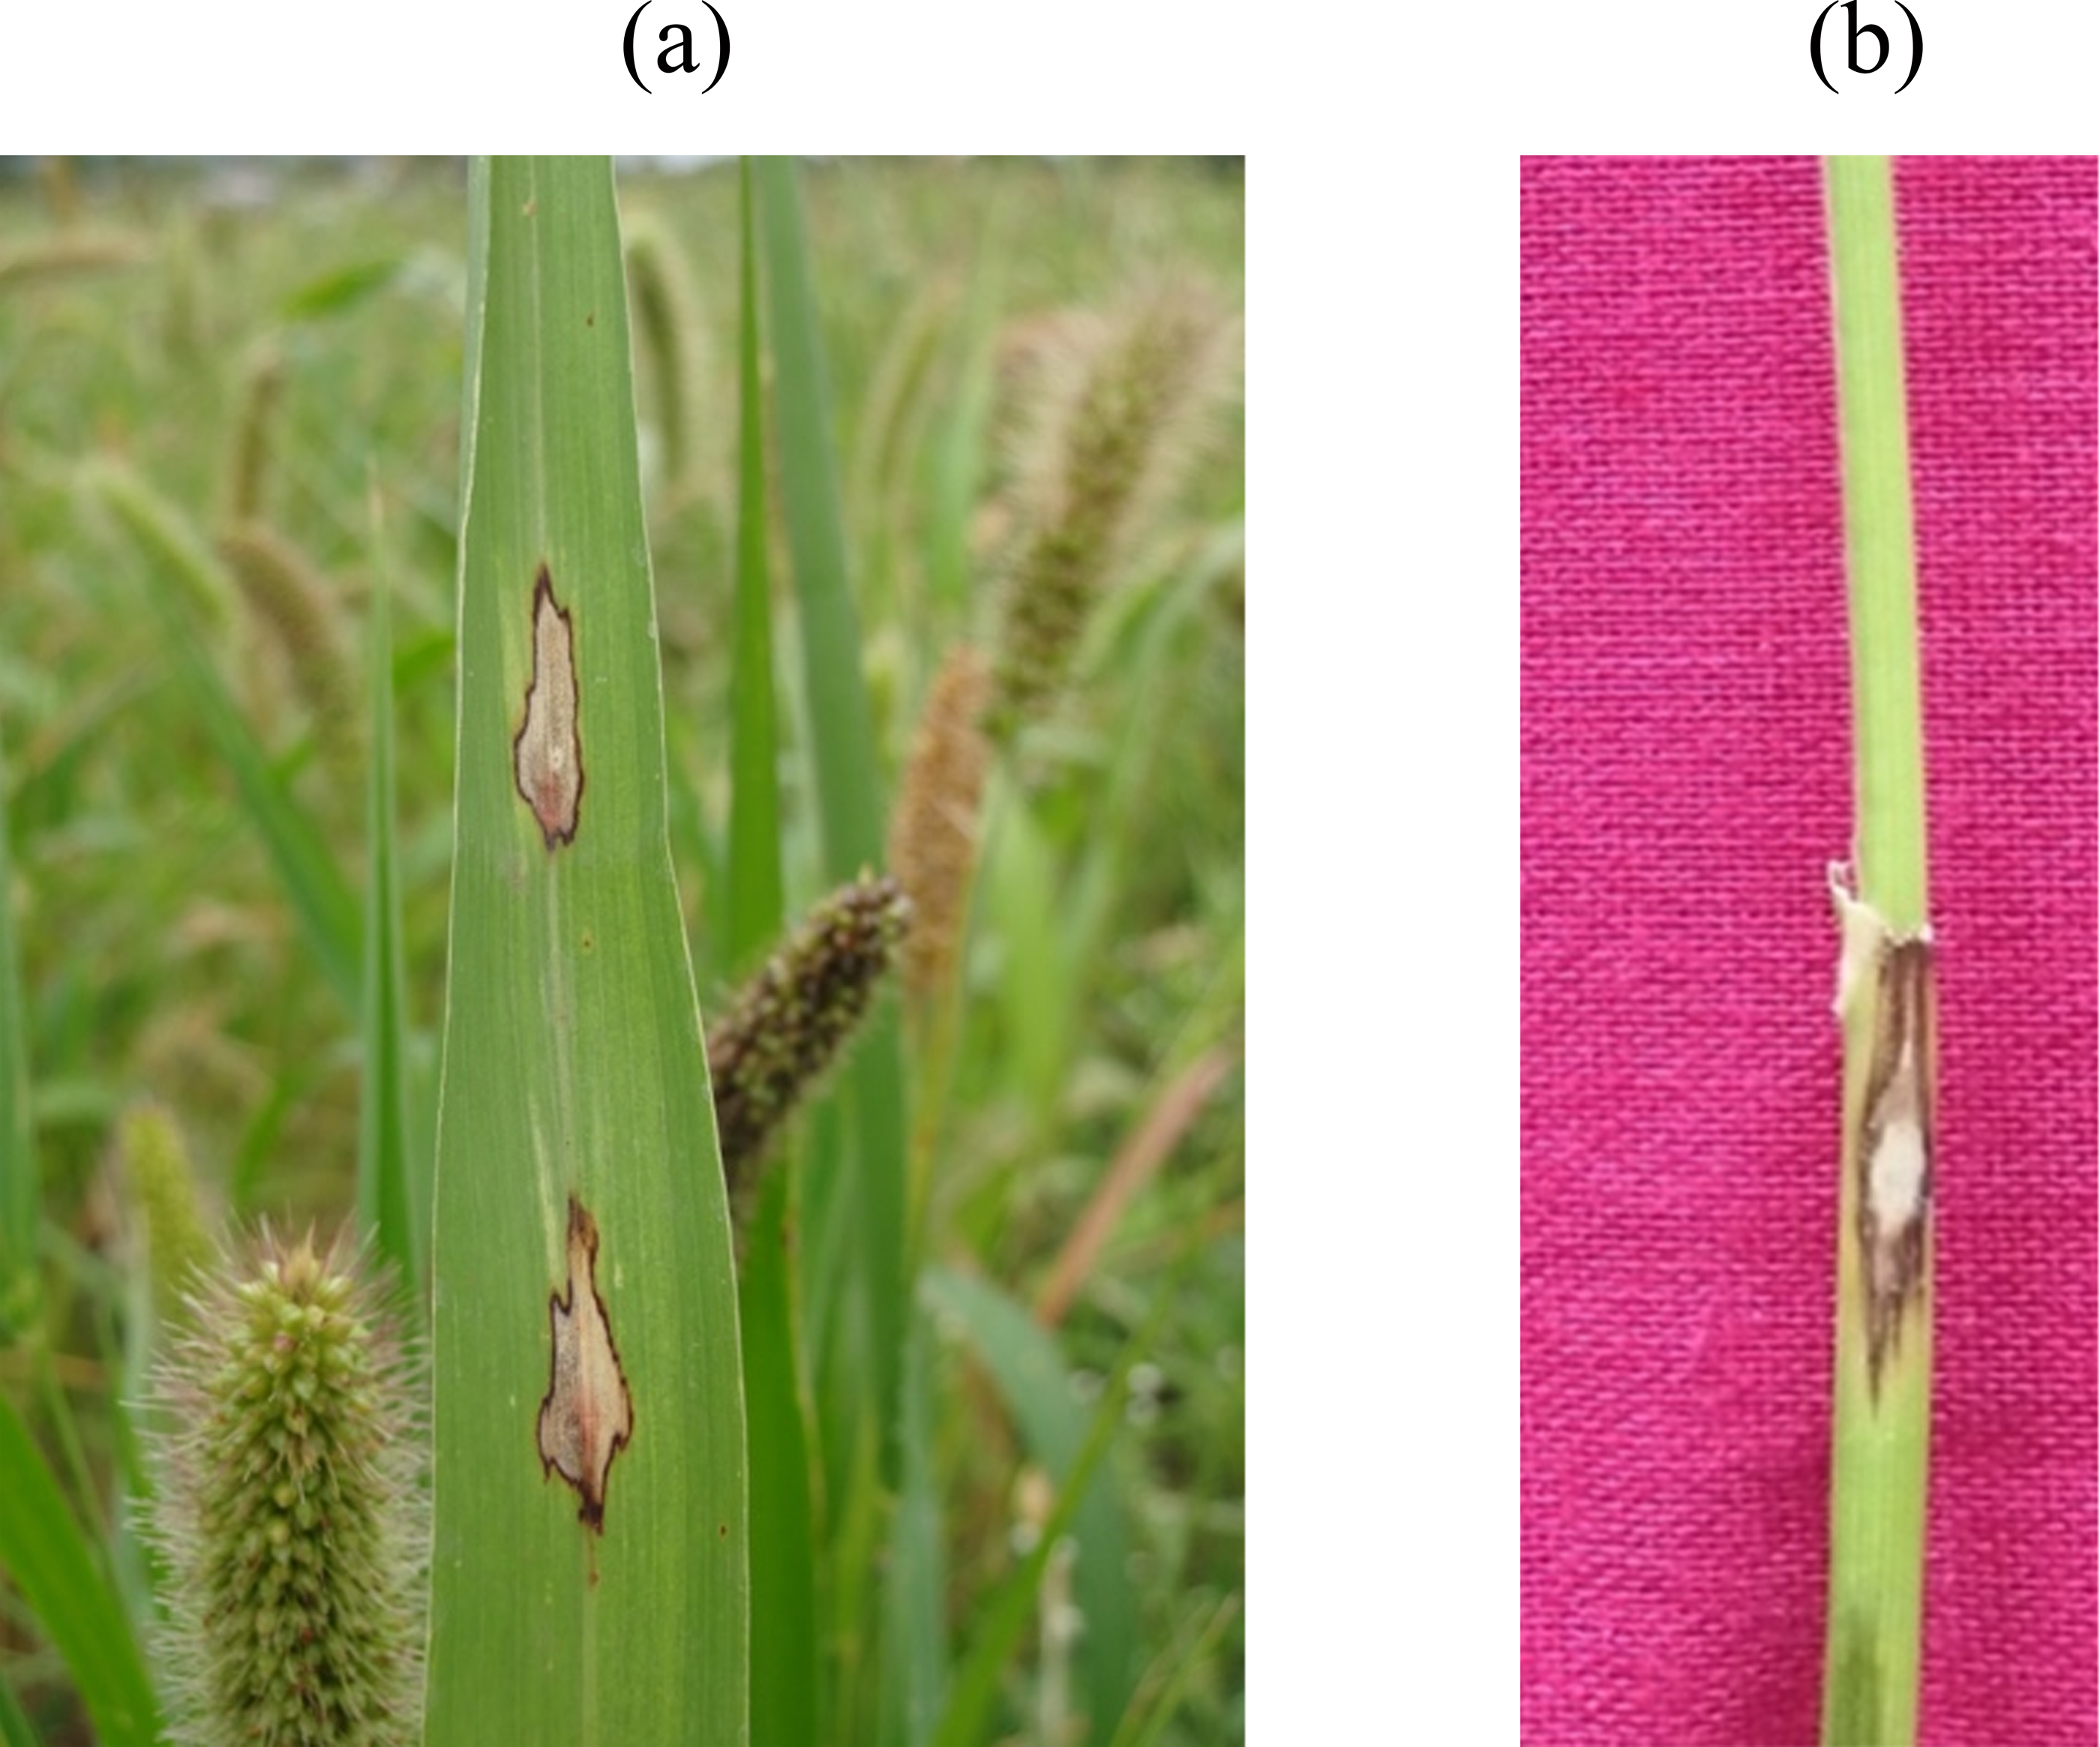 Analysis of genetic diversity and population structure of Magnaporthe  grisea, the causal agent of foxtail millet blast using microsatellites  [PeerJ]